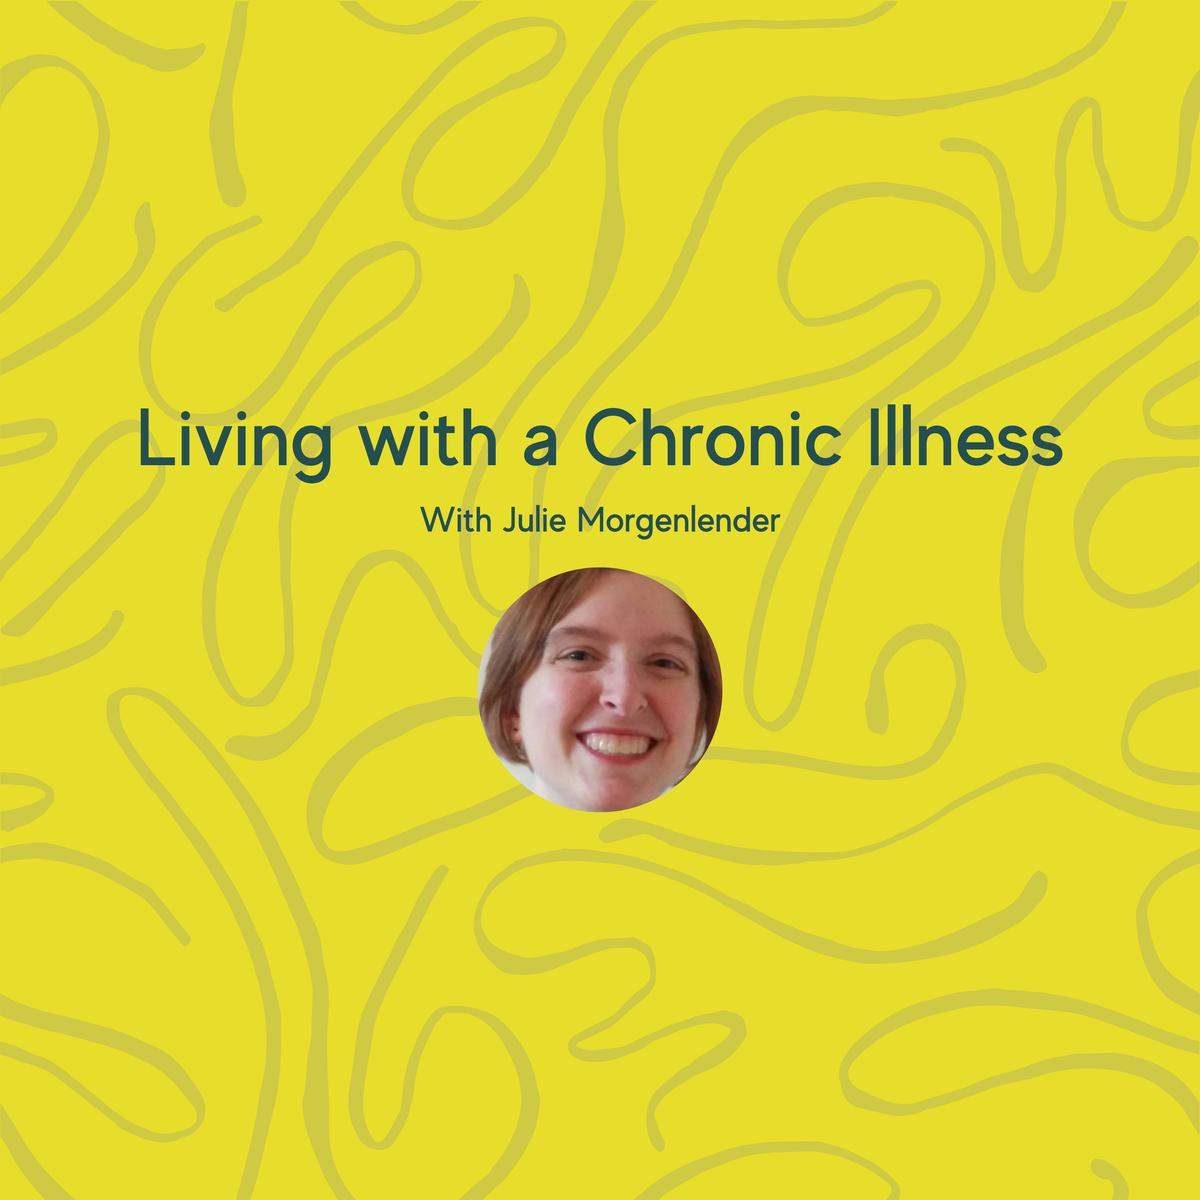 Living with a Chronic Illness with Julie Morgenlender